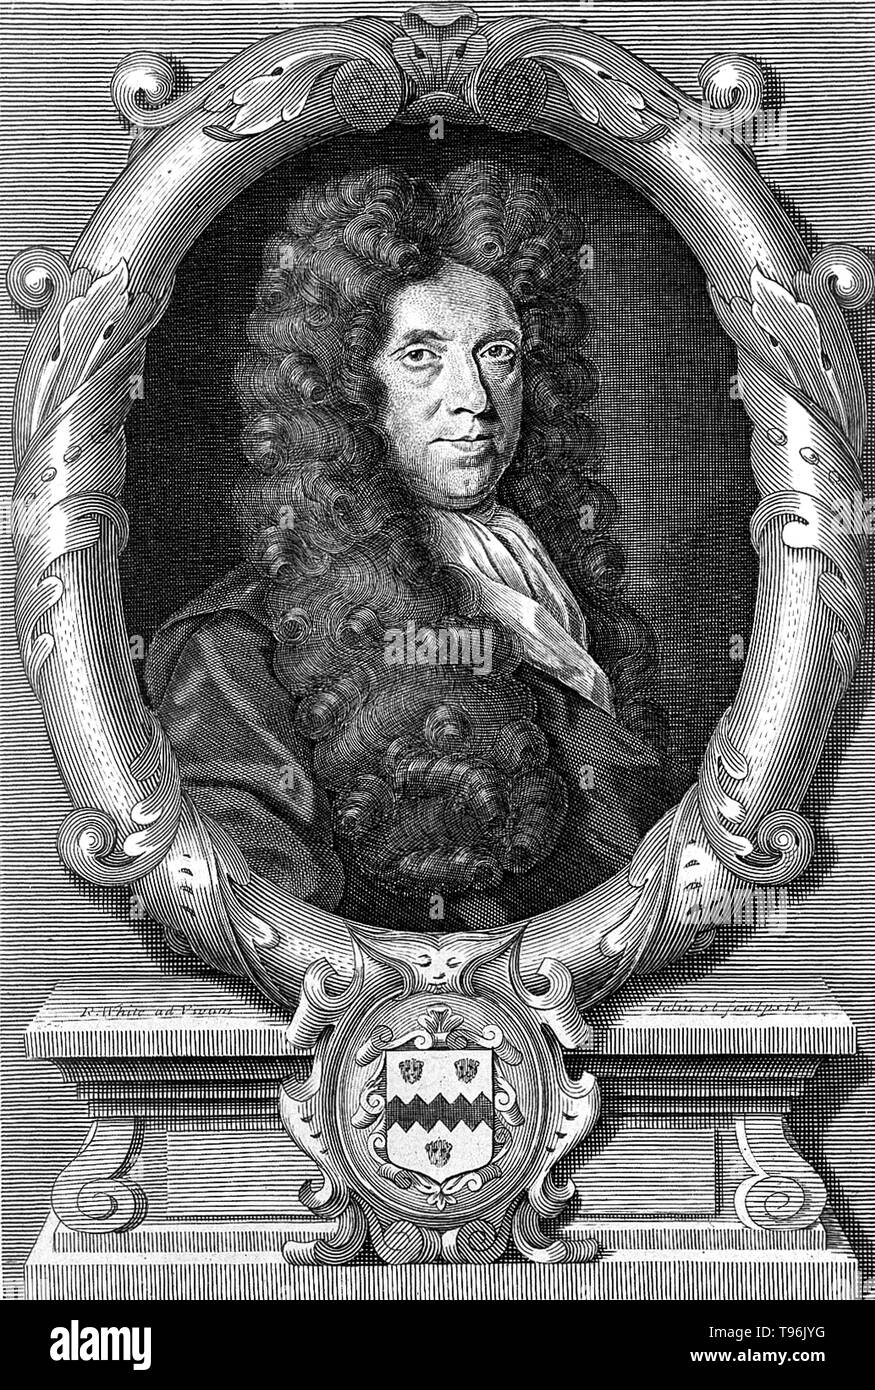 Nehemiah Grew (September 26, 1641 - March 25, 1712) was an English plant anatomist and physiologist, known as the Father of Plant Anatomy. In 1671 he took the degree of M.D. at Leiden University. In 1672, he settled in London, and soon acquired an extensive practice as a physician. In 1682 he published Anatomy of Plants, which also was largely a collection of previous publications. Stock Photo